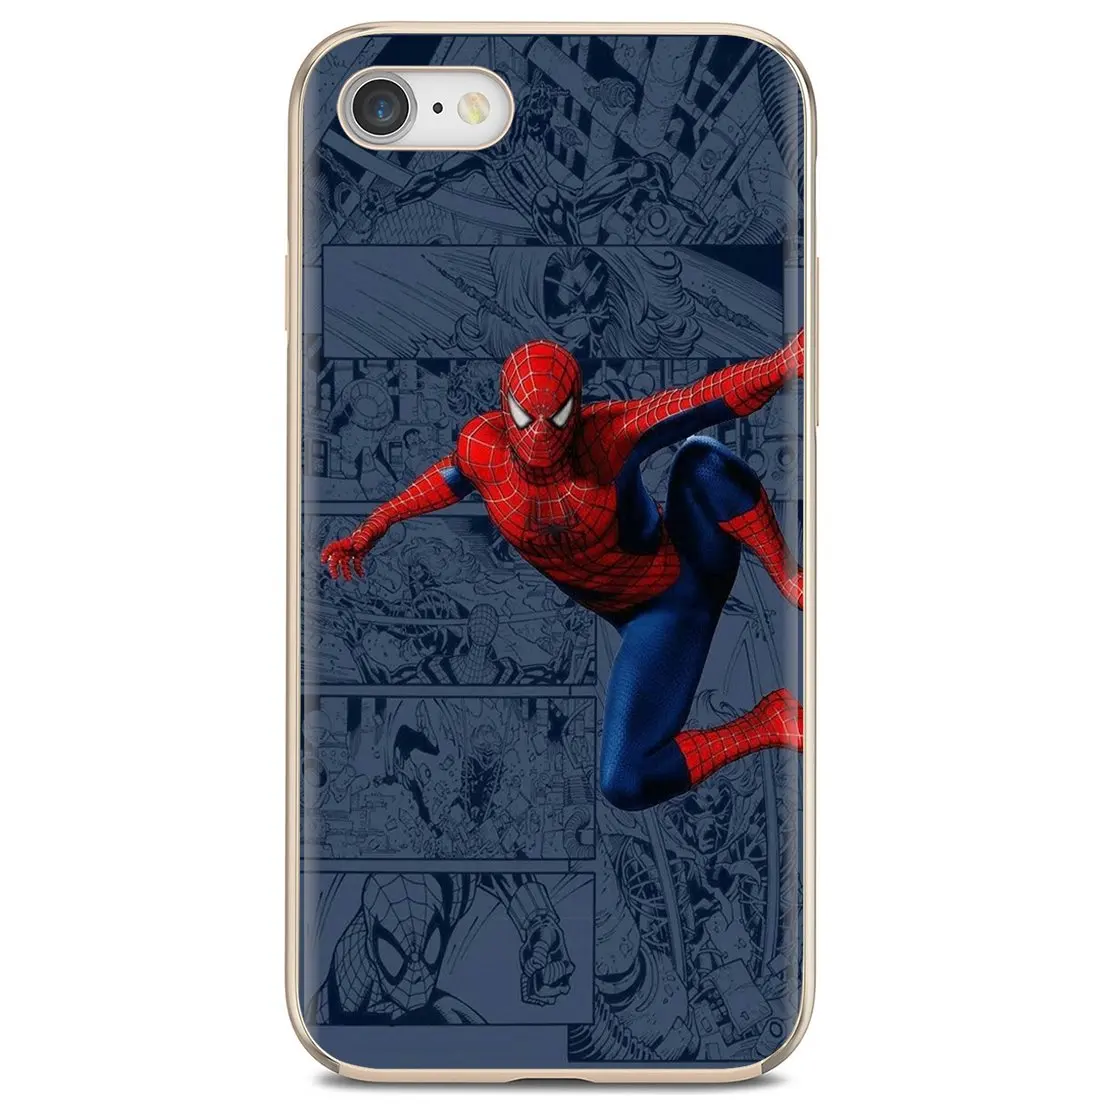 meizu phone case with stones lock TPU Transparent Shell Cover Spider Man Marvel Hulk For Meizu M6 M5 M6S M5S M2 M3 M3S NOTE MX6 M6t 6 5 Pro Plus U20 meizu cover Cases For Meizu